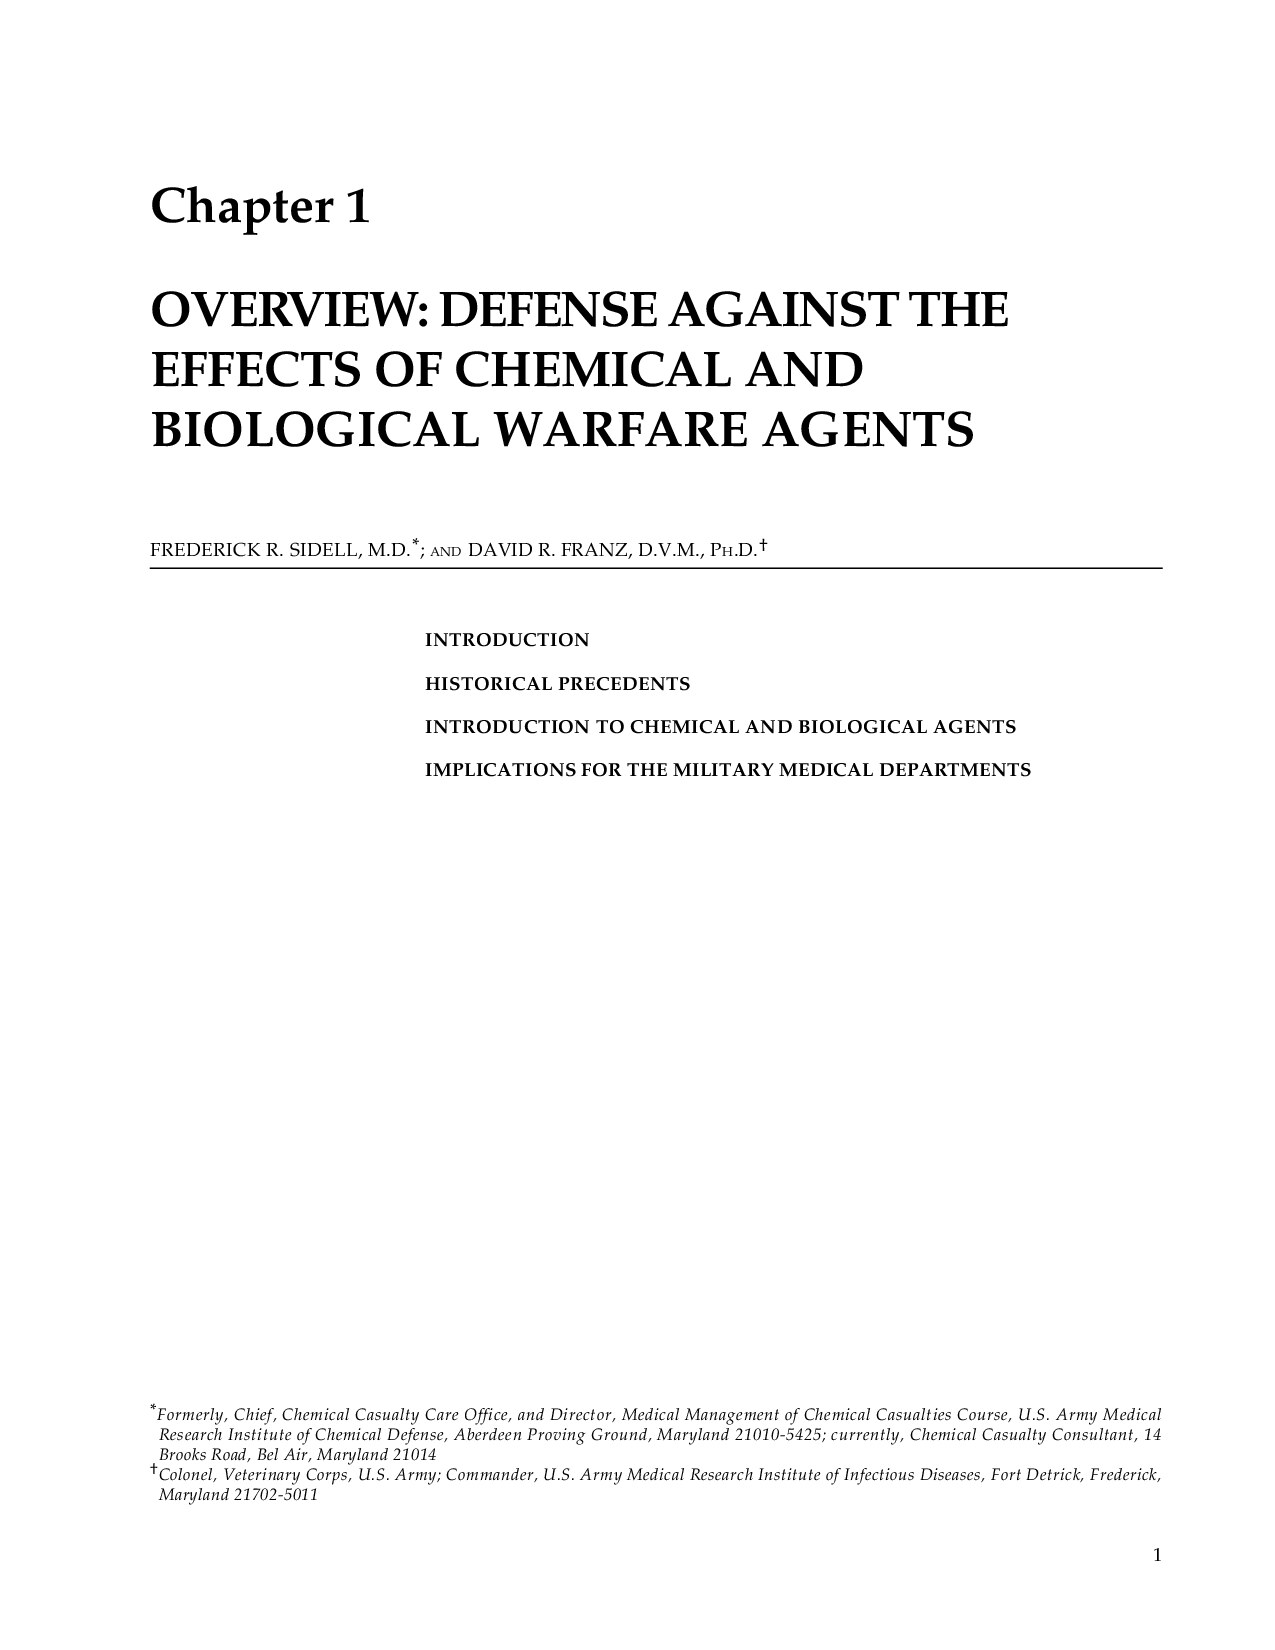 Defense Against the Effects of Chemical and Biological Warfare Agents